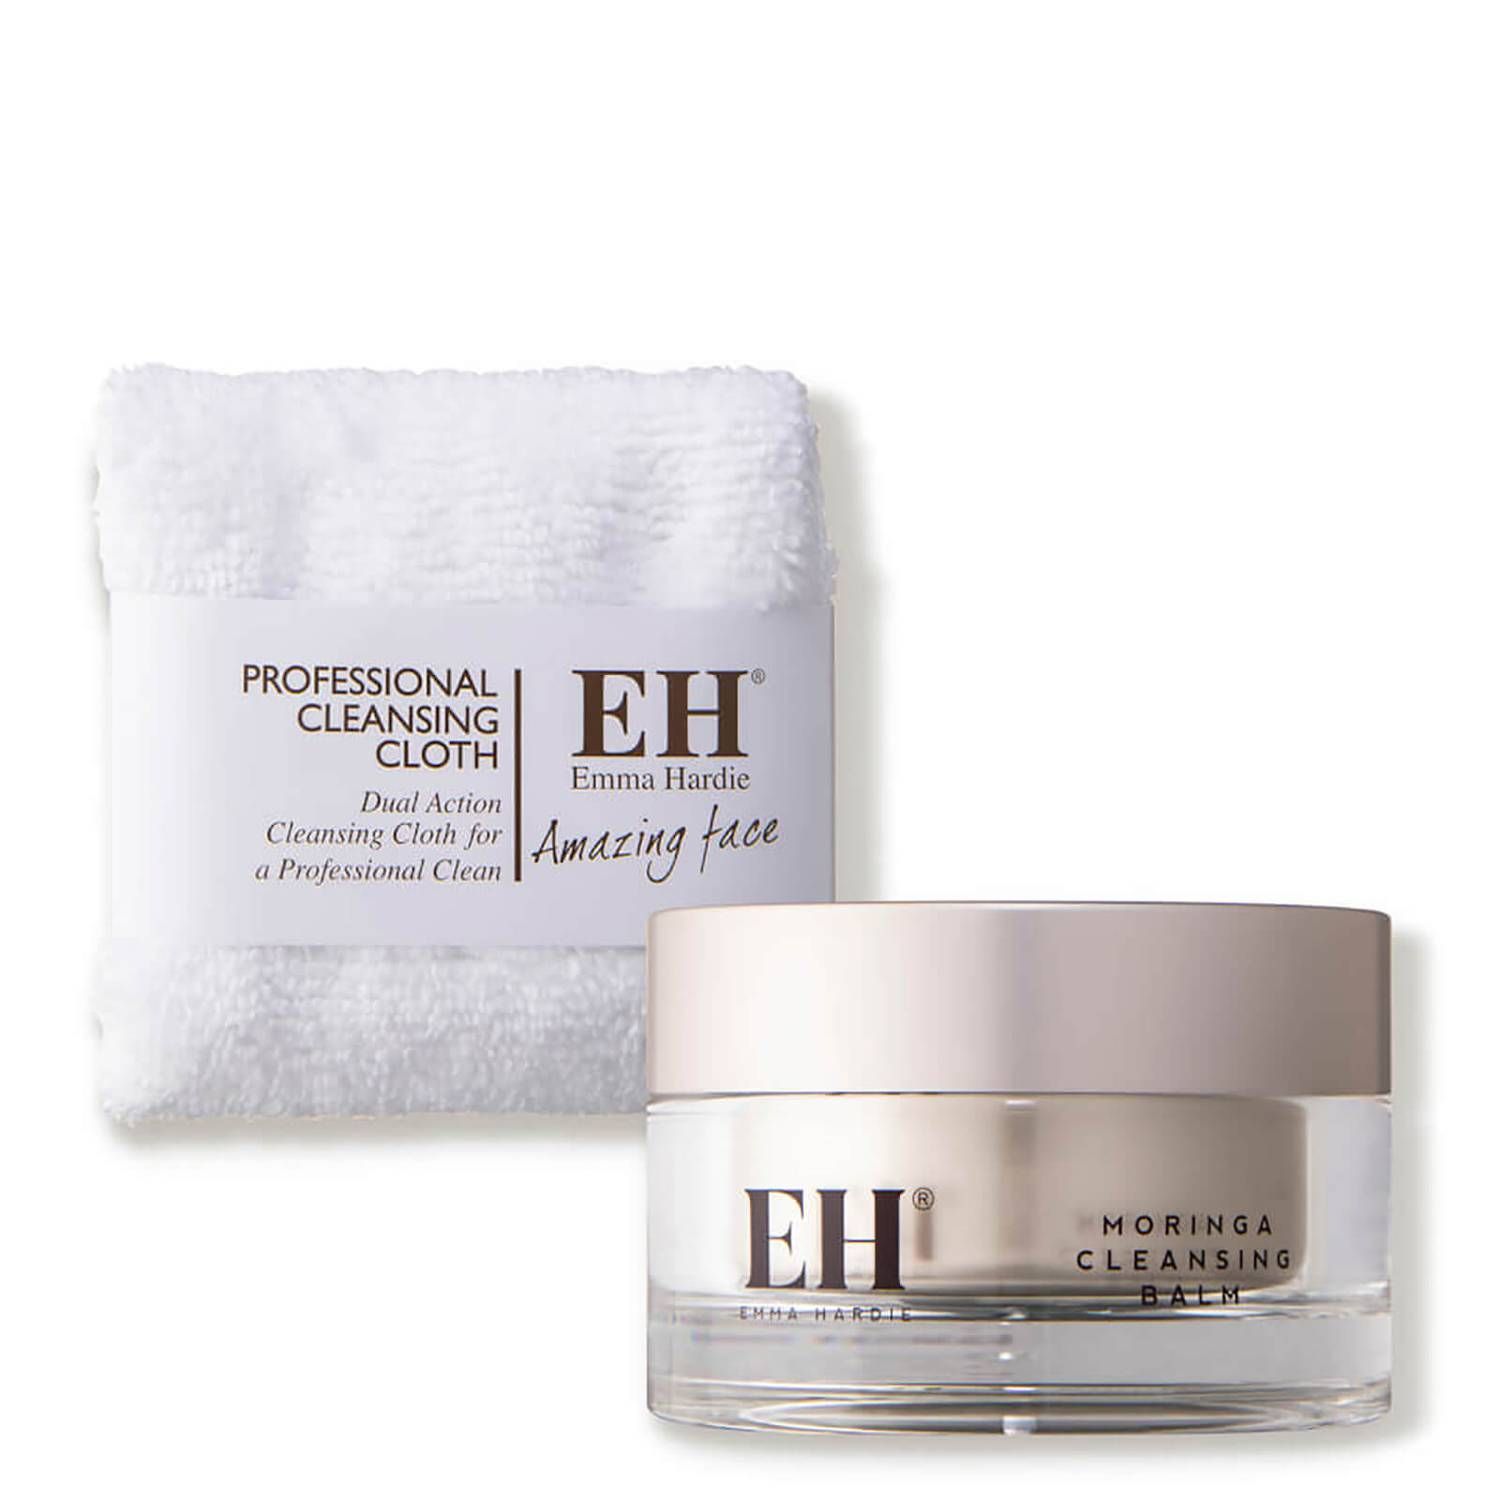 Emma Hardie Moringa Cleansing Balm with Professional Cleansing Cloth 100g | Look Fantastic (ROW)